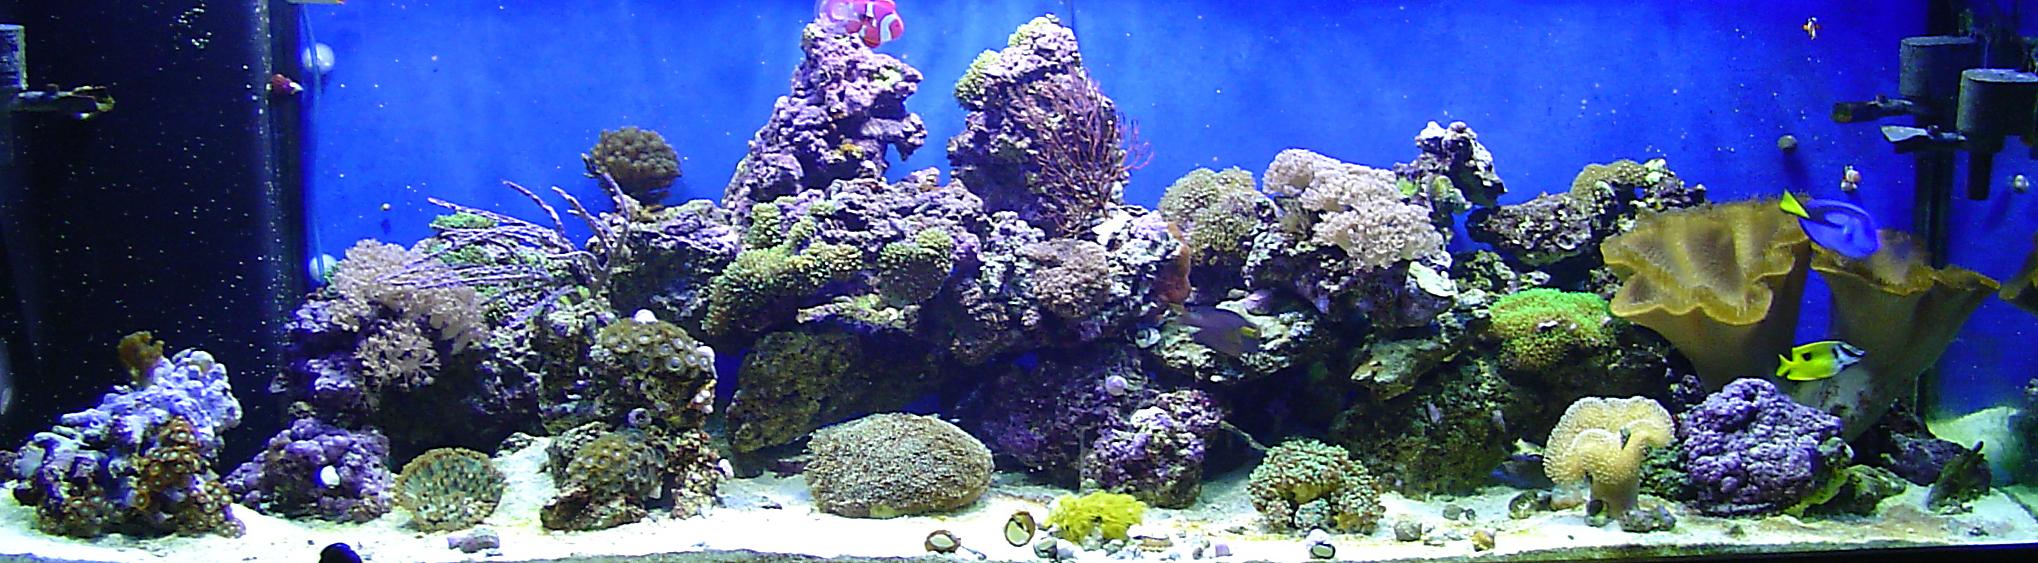 My 125 gallon reef in August 2005